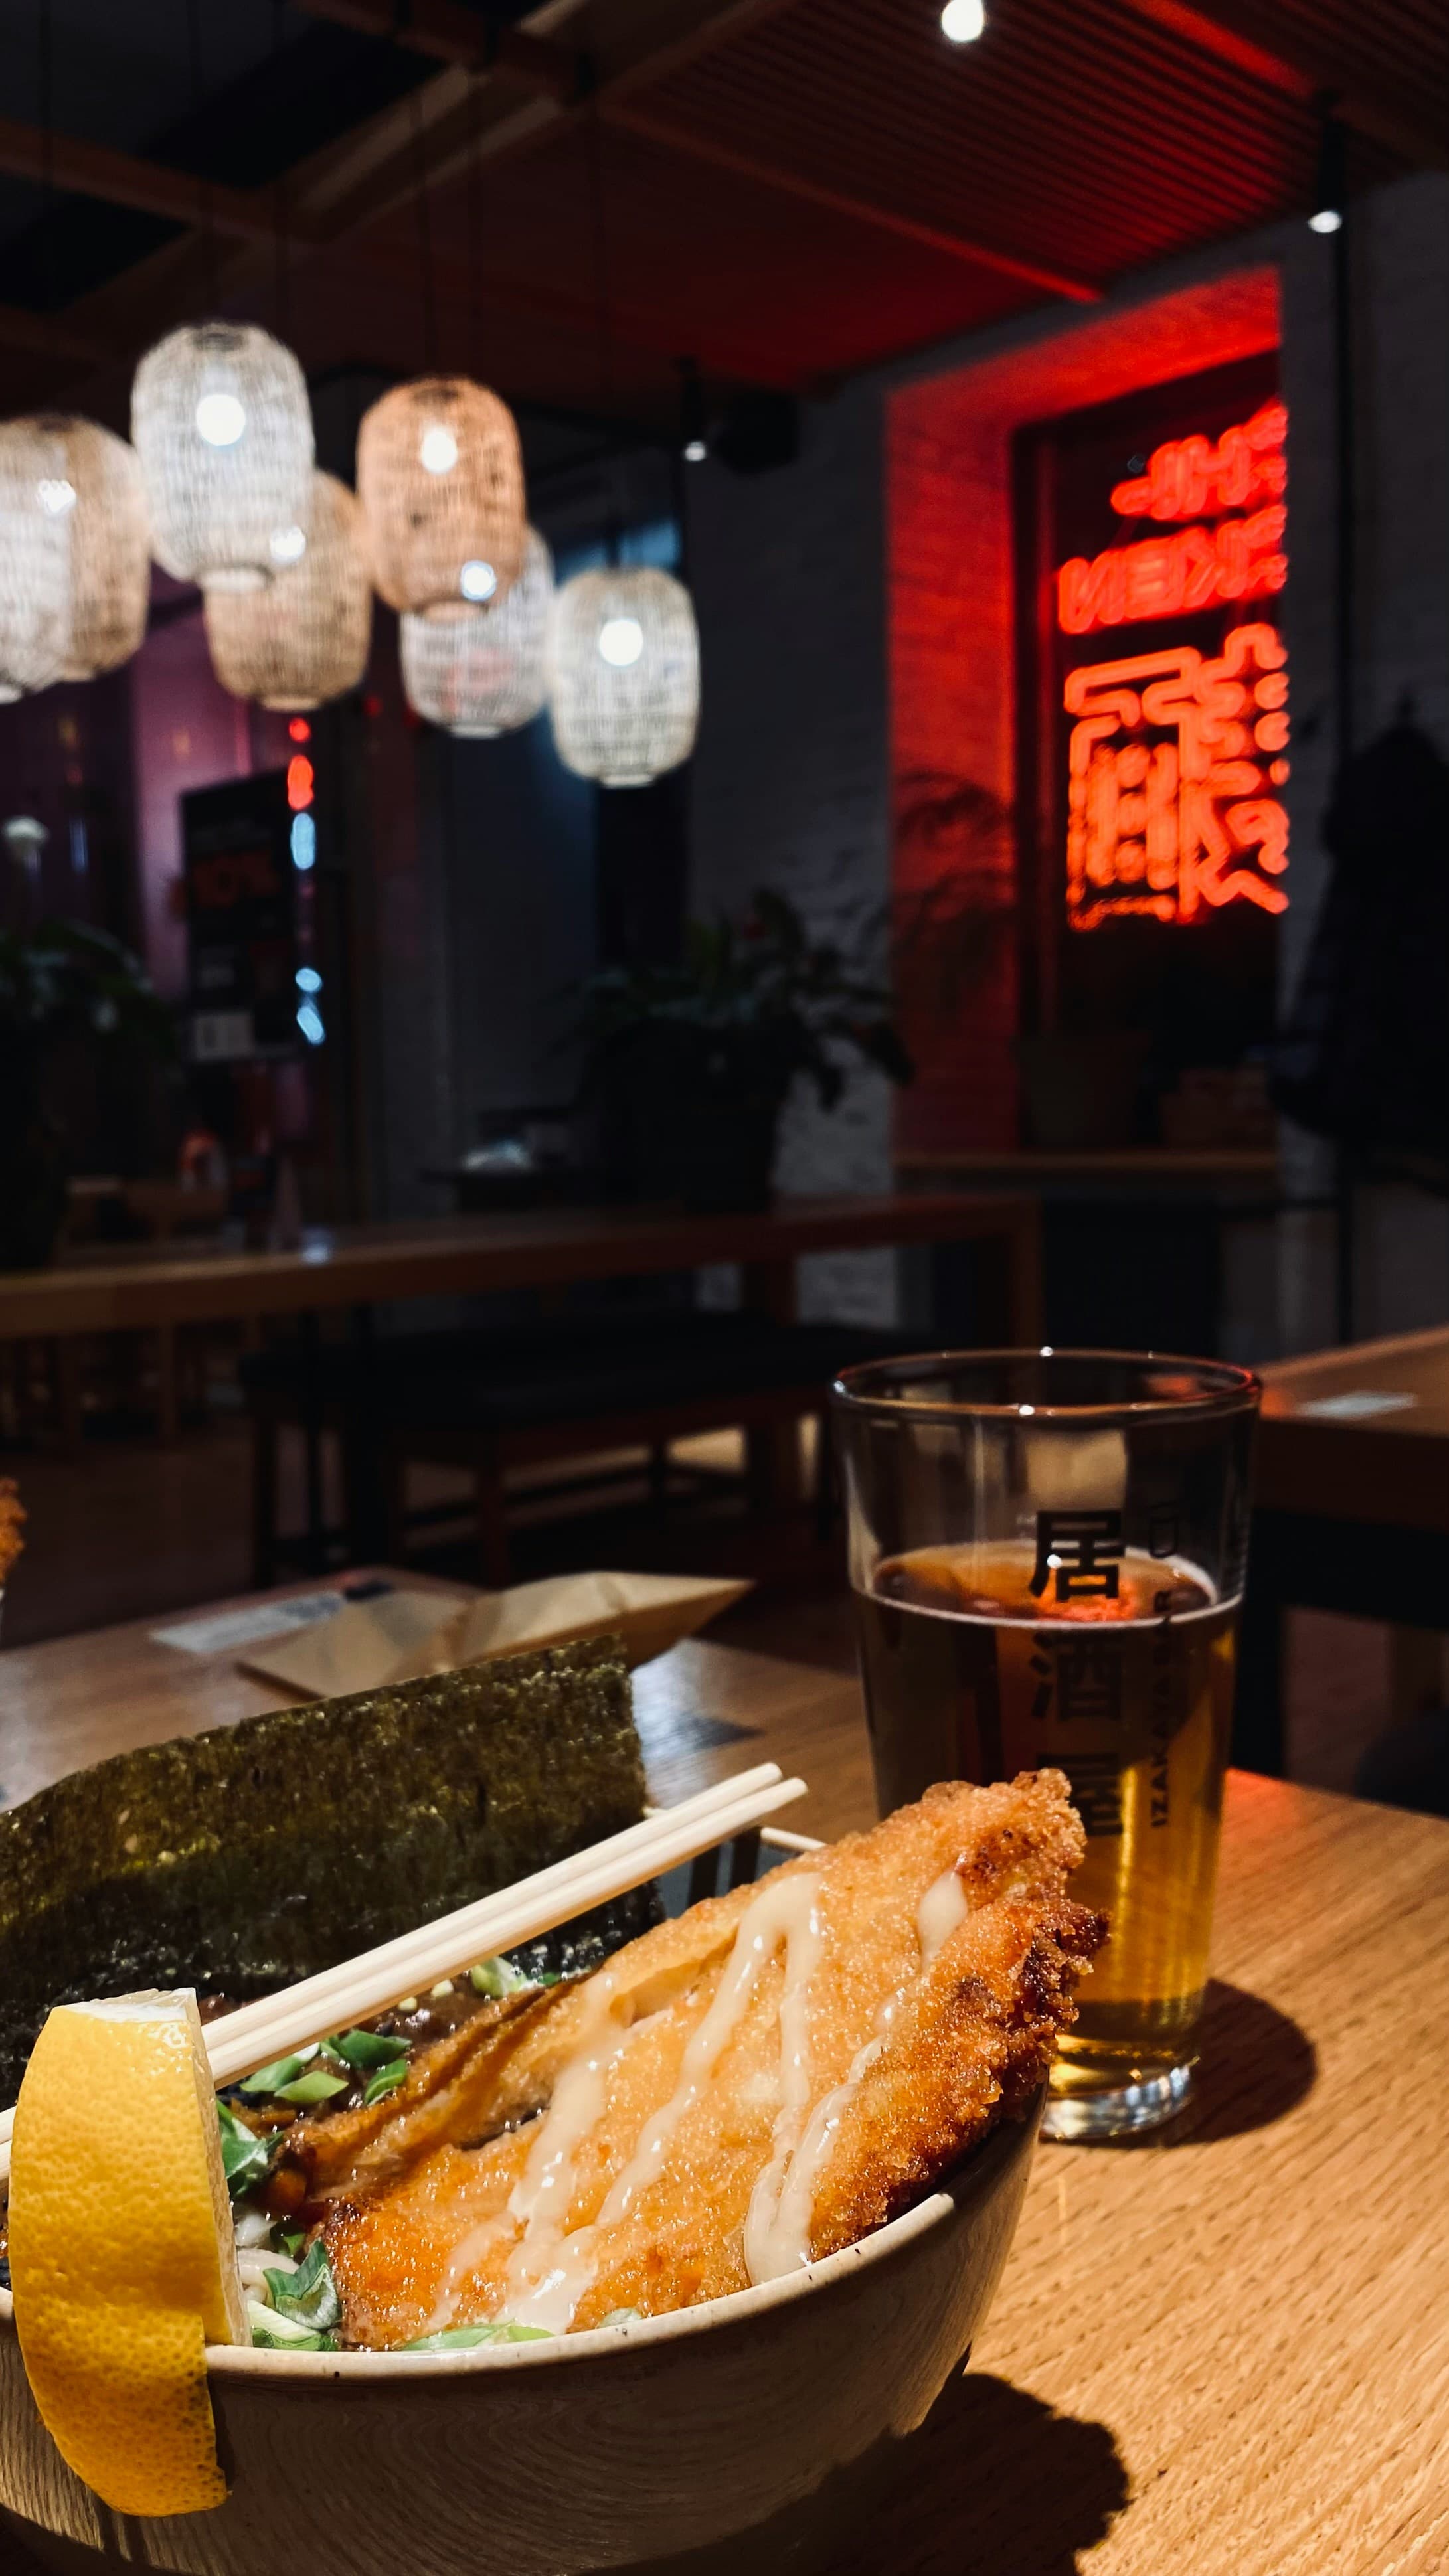 Japan-Inspired Food & Drinks To Throw The Coolest Ramen & Sake Party In Town!